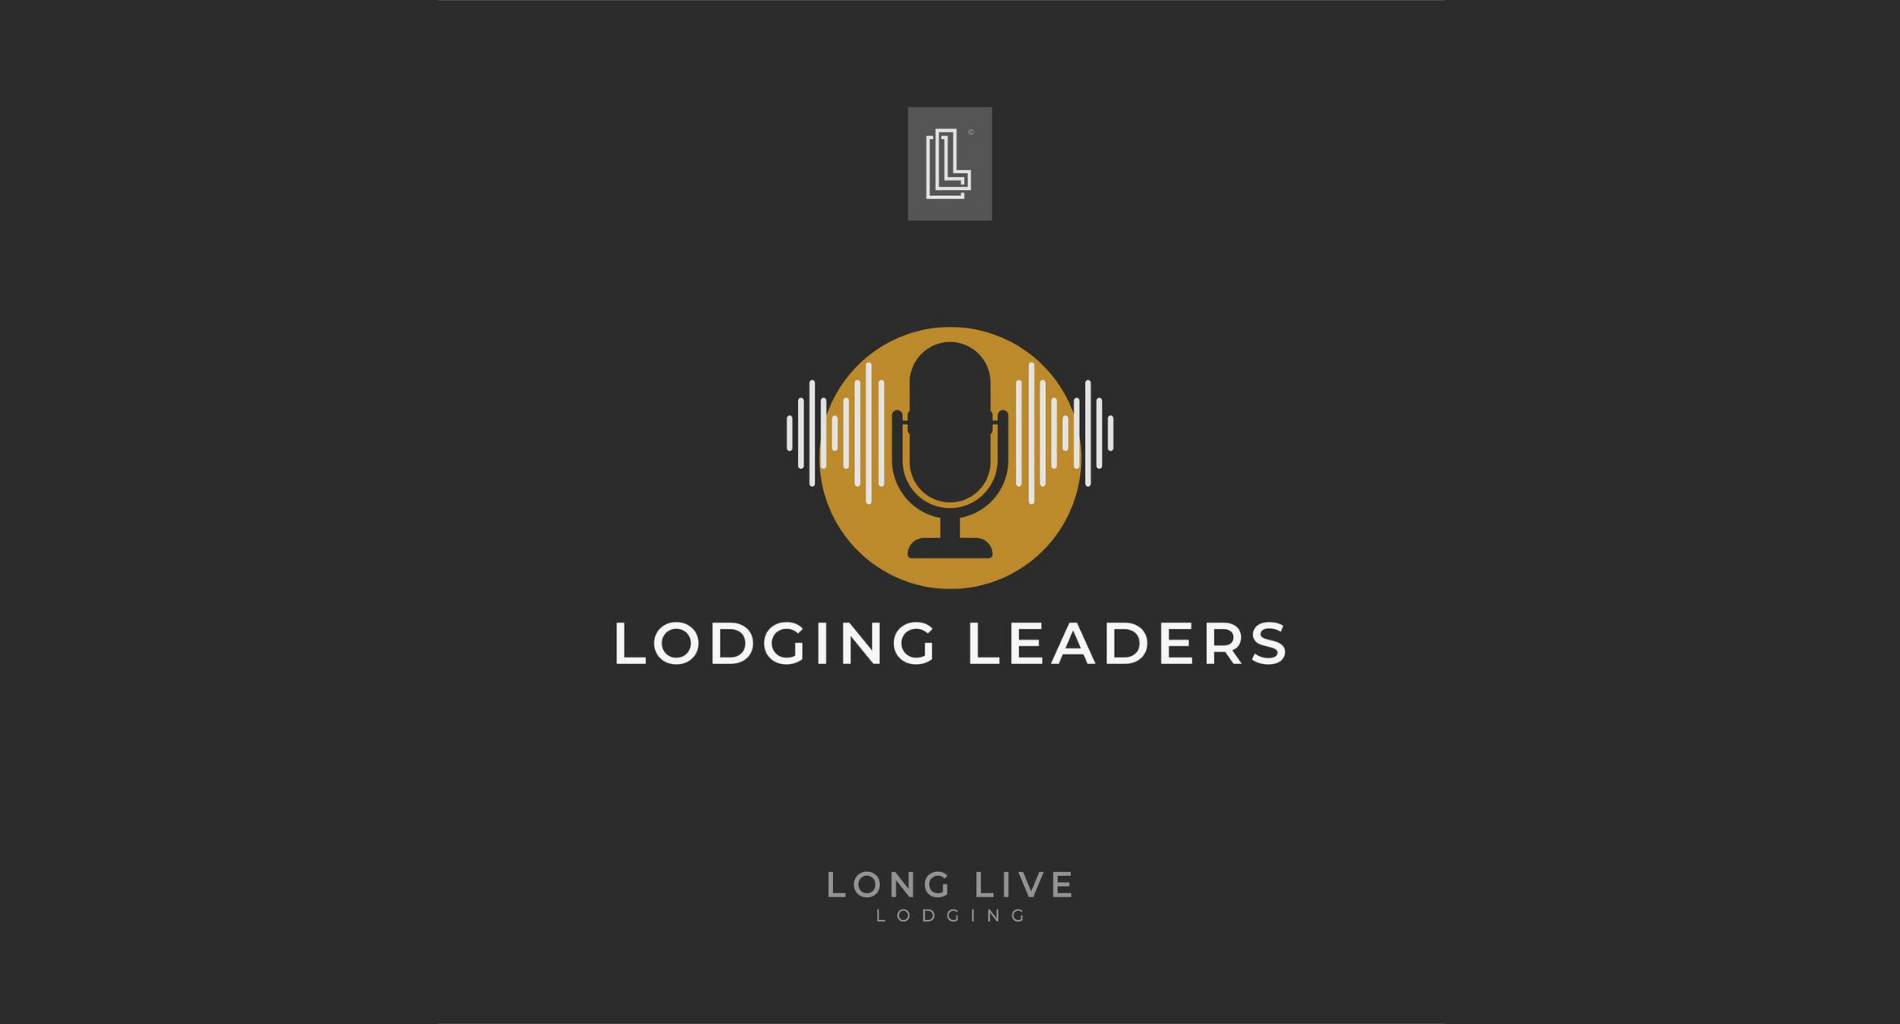 Lodging leaders podcast hospitality